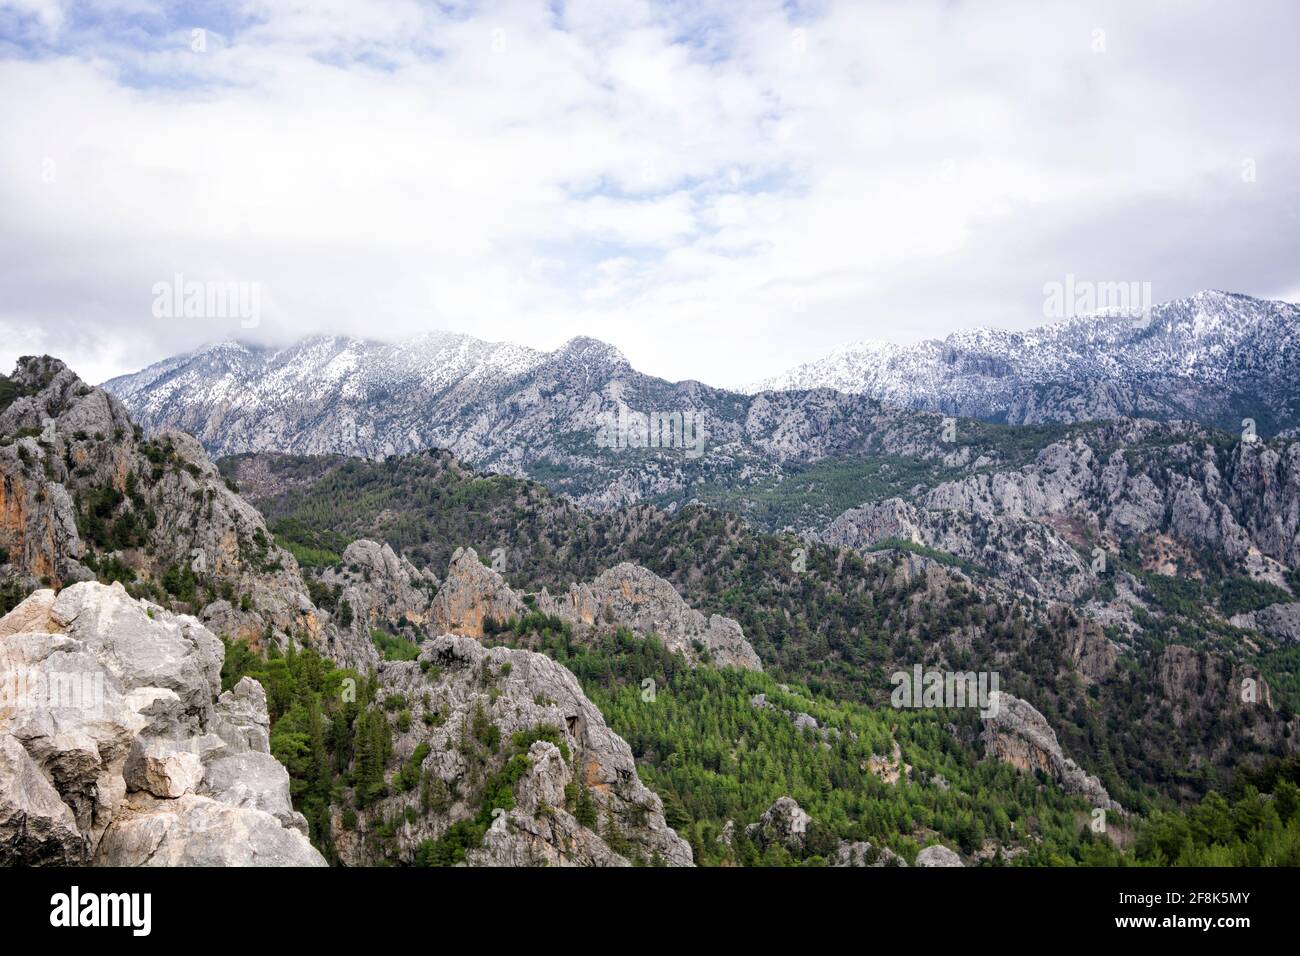 Peaks of the Taurus mountains covered with conifer trees Stock Photo